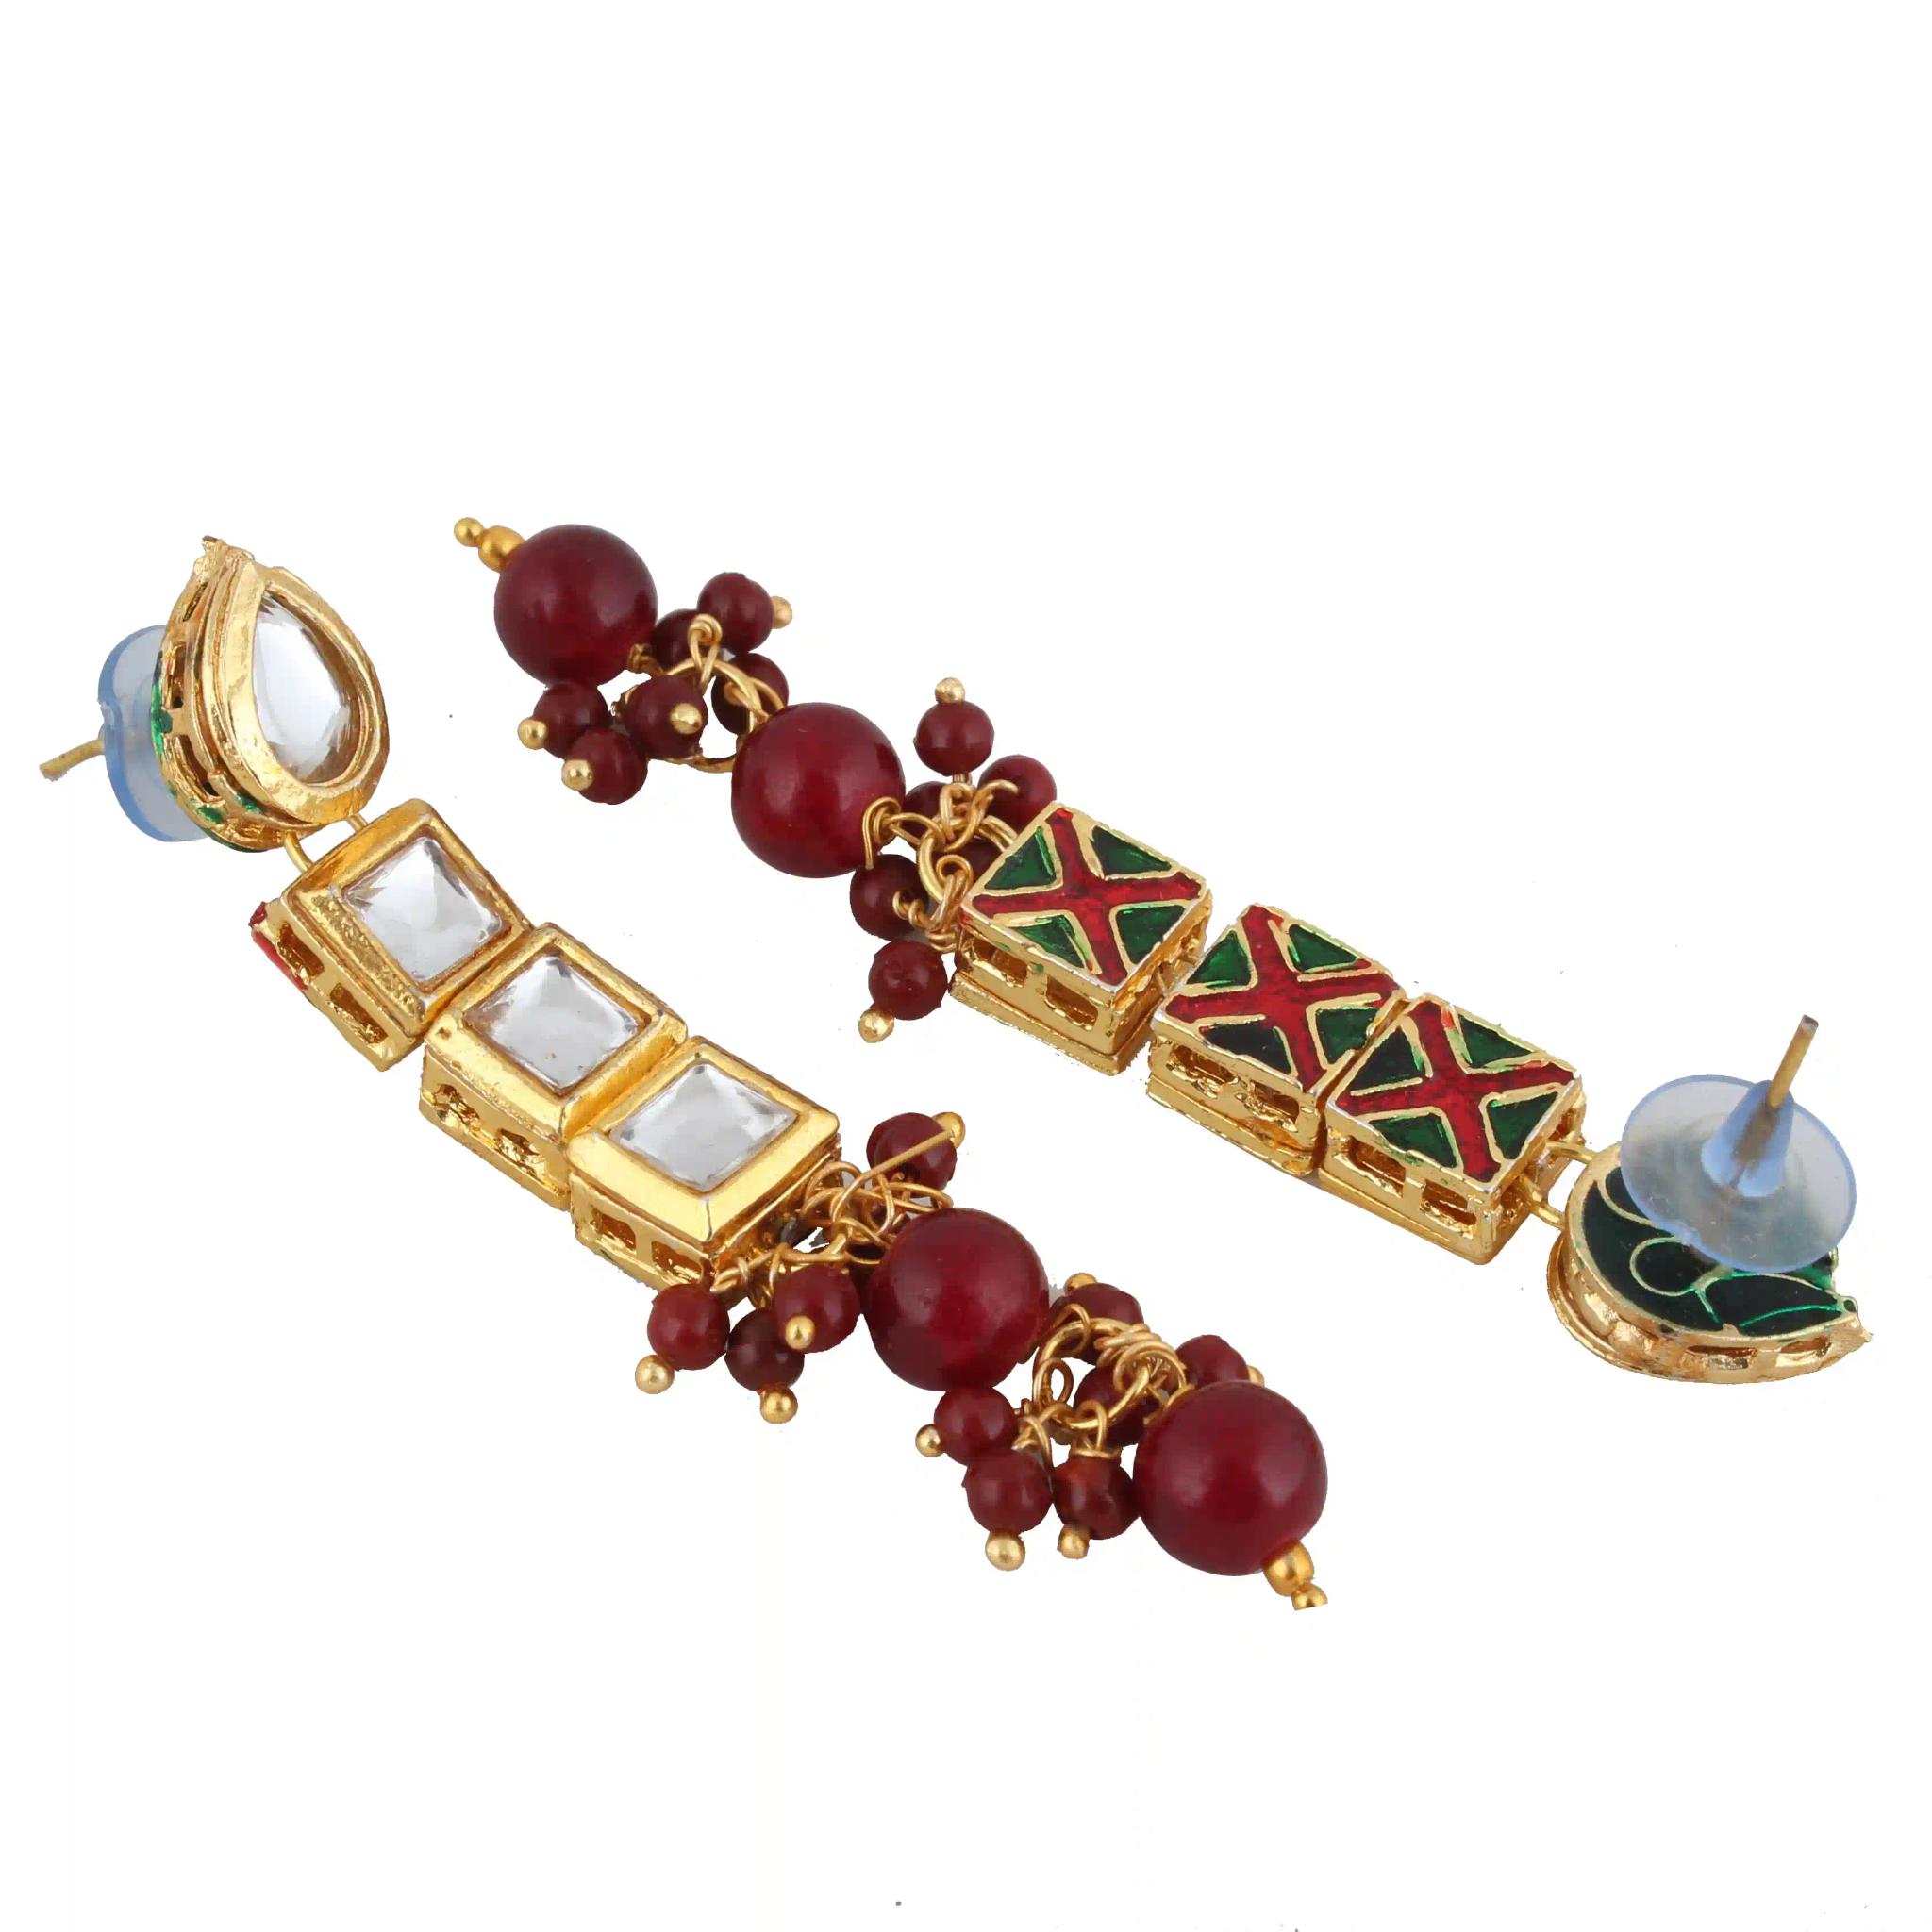 Gold Plated(18k) Square Shape Stone Design Jewellery Set & Maang Tika With Beads - Maroon